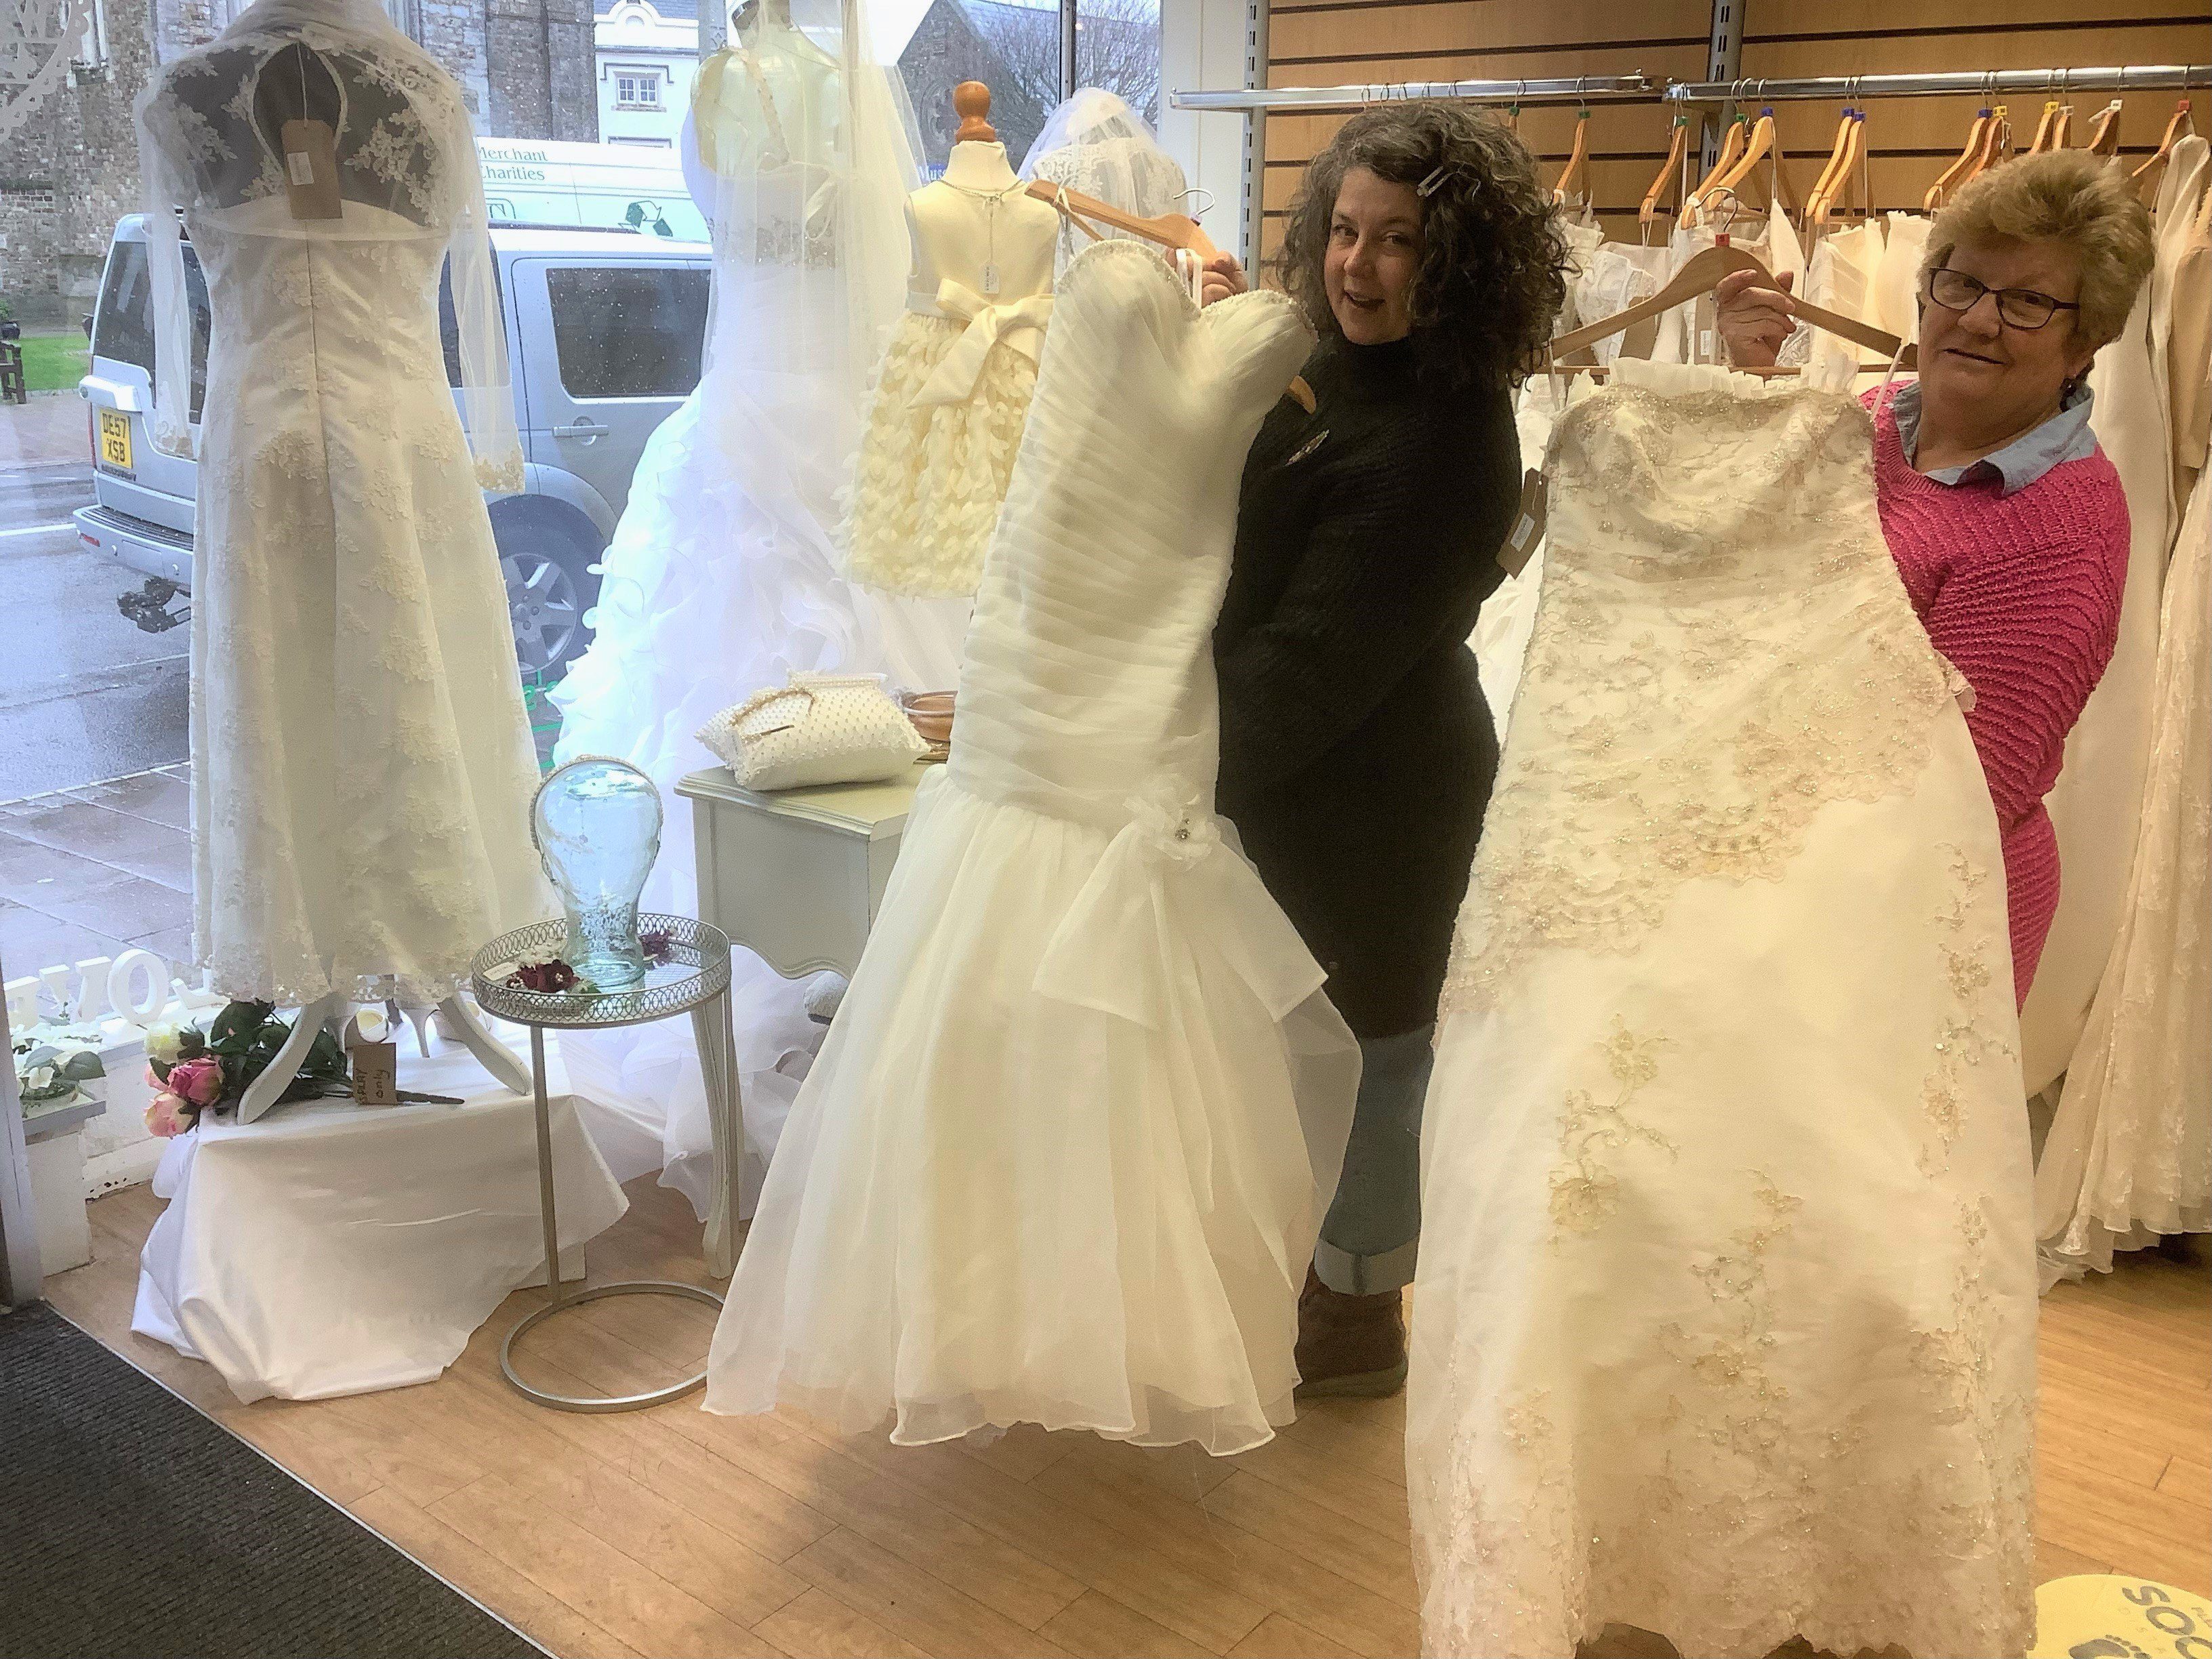 Lynne Whitehall and Emily Thornhill with the wedding dresses in the Honiton Children’s Hospice South West shop